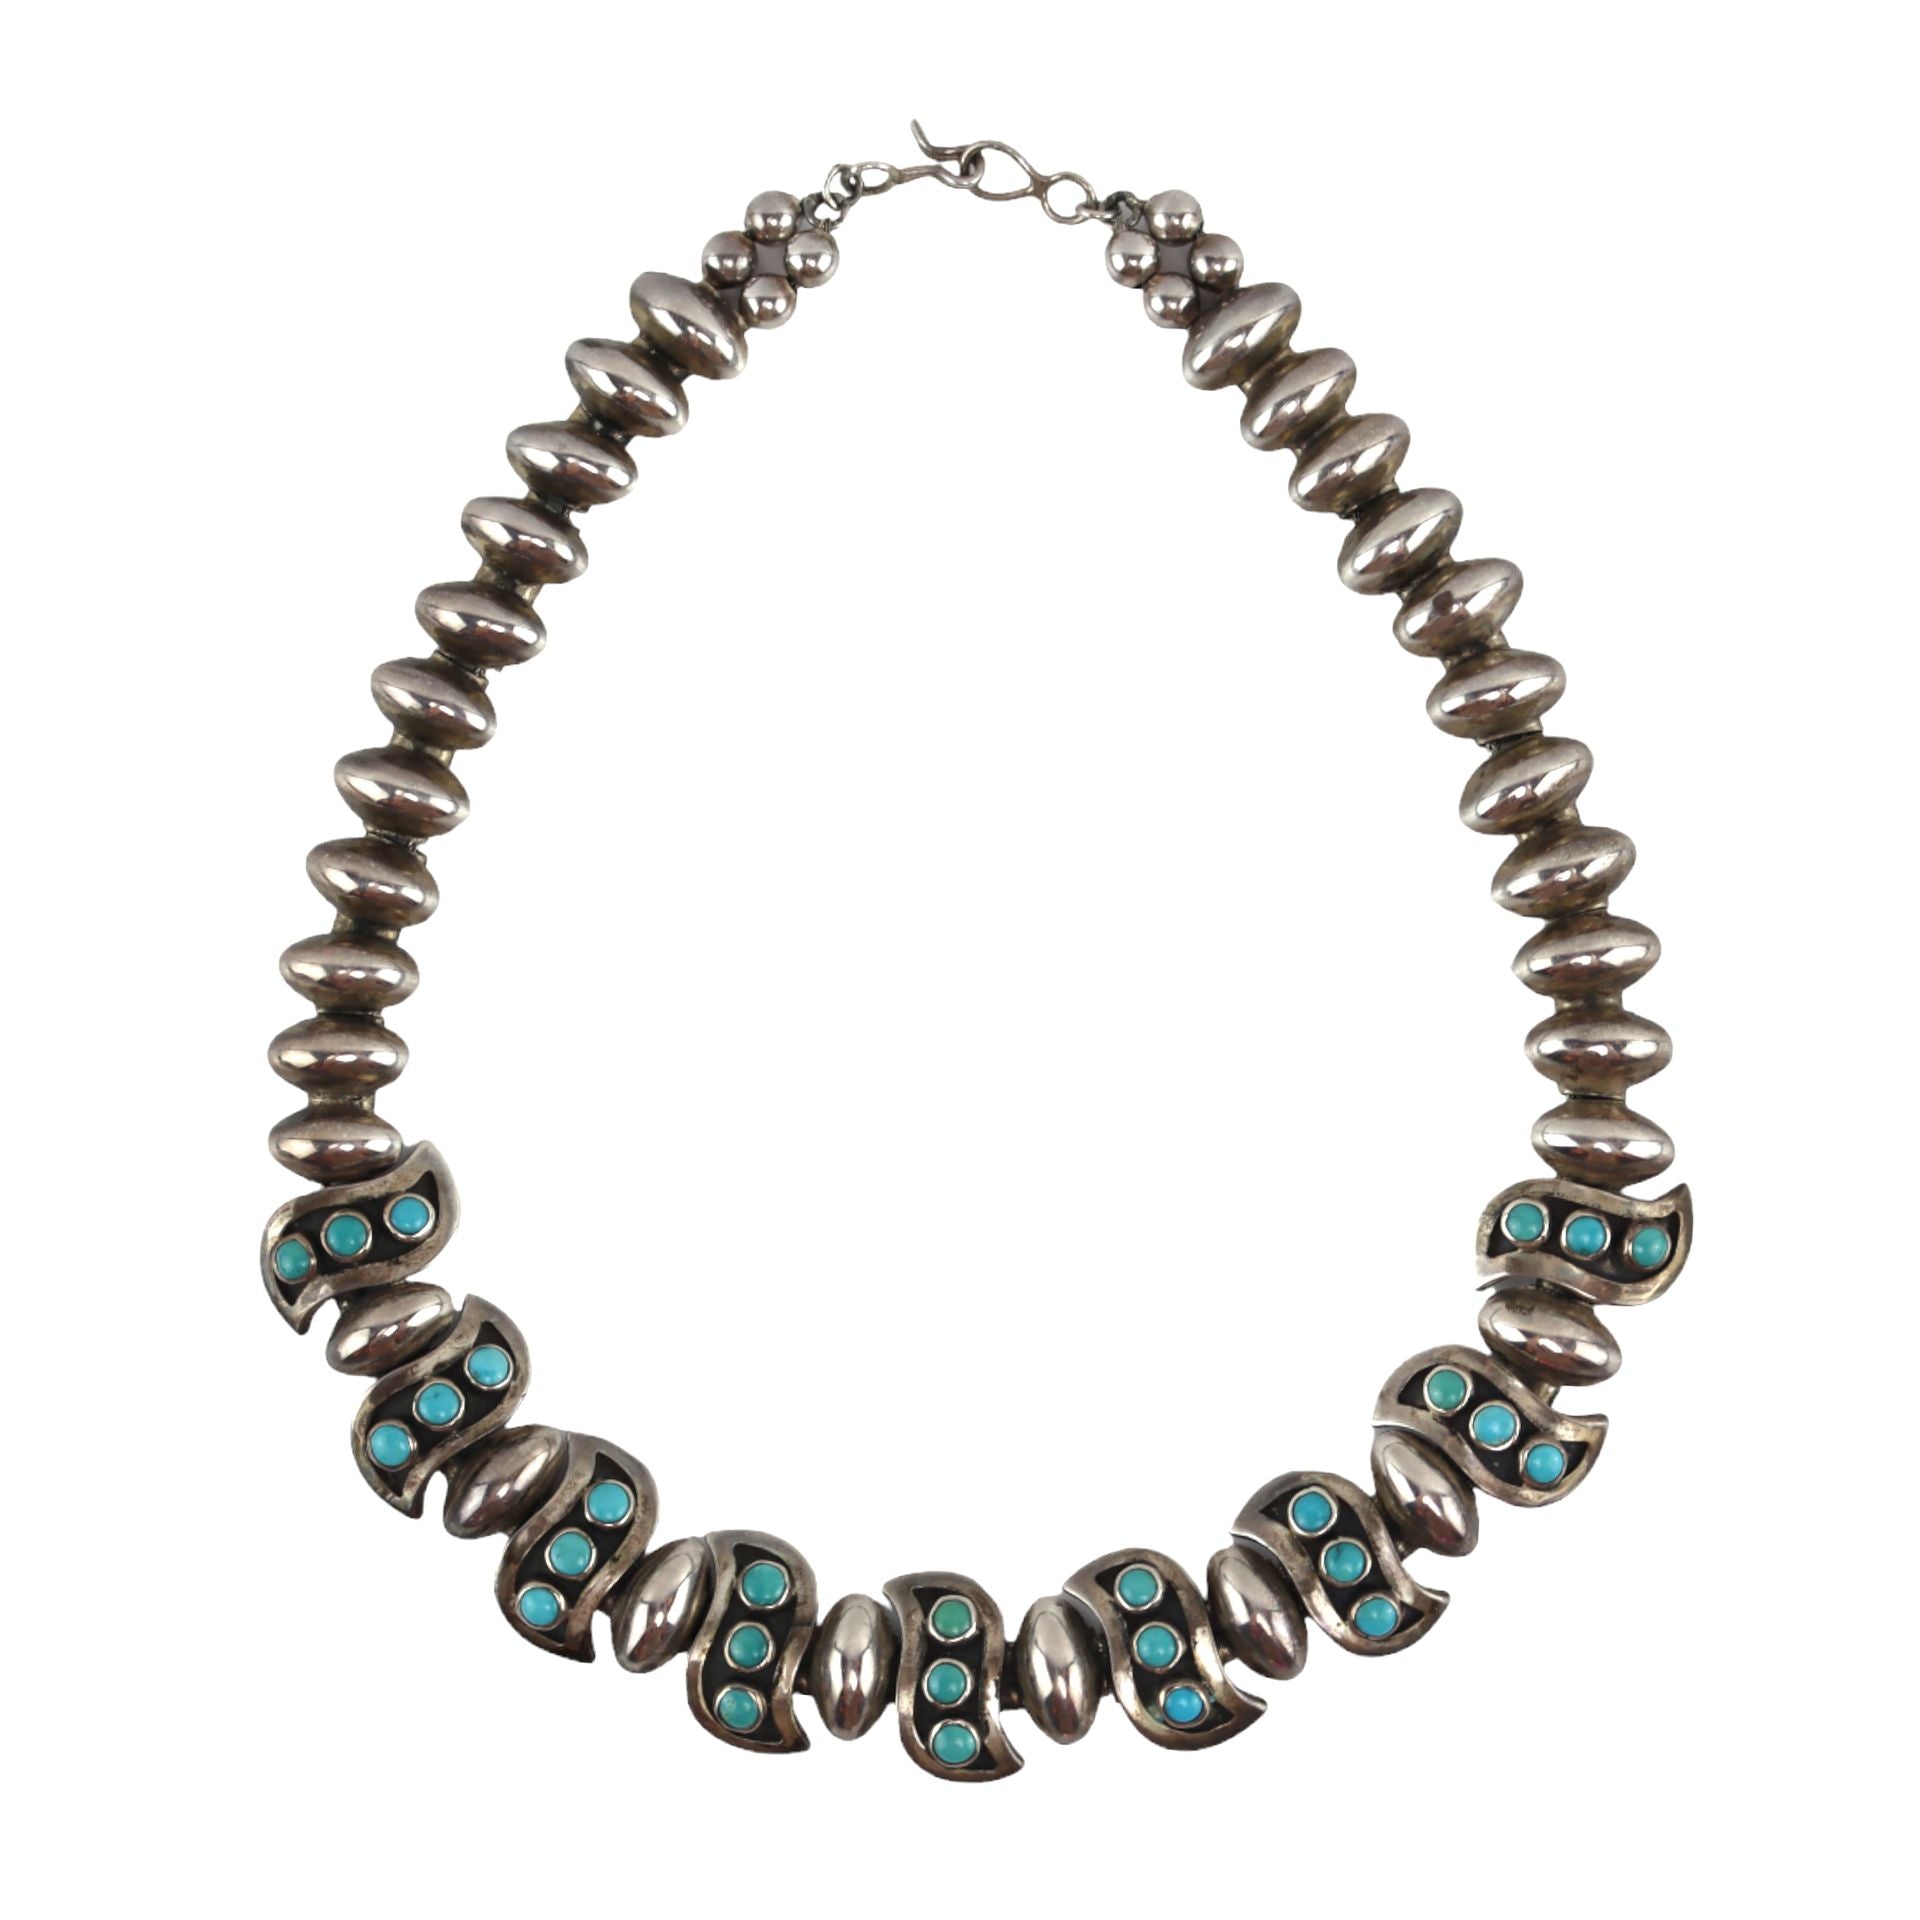 Navajo - Turquoise and Silver Beaded Necklace c. 1950-60s, 17" length (J16021)